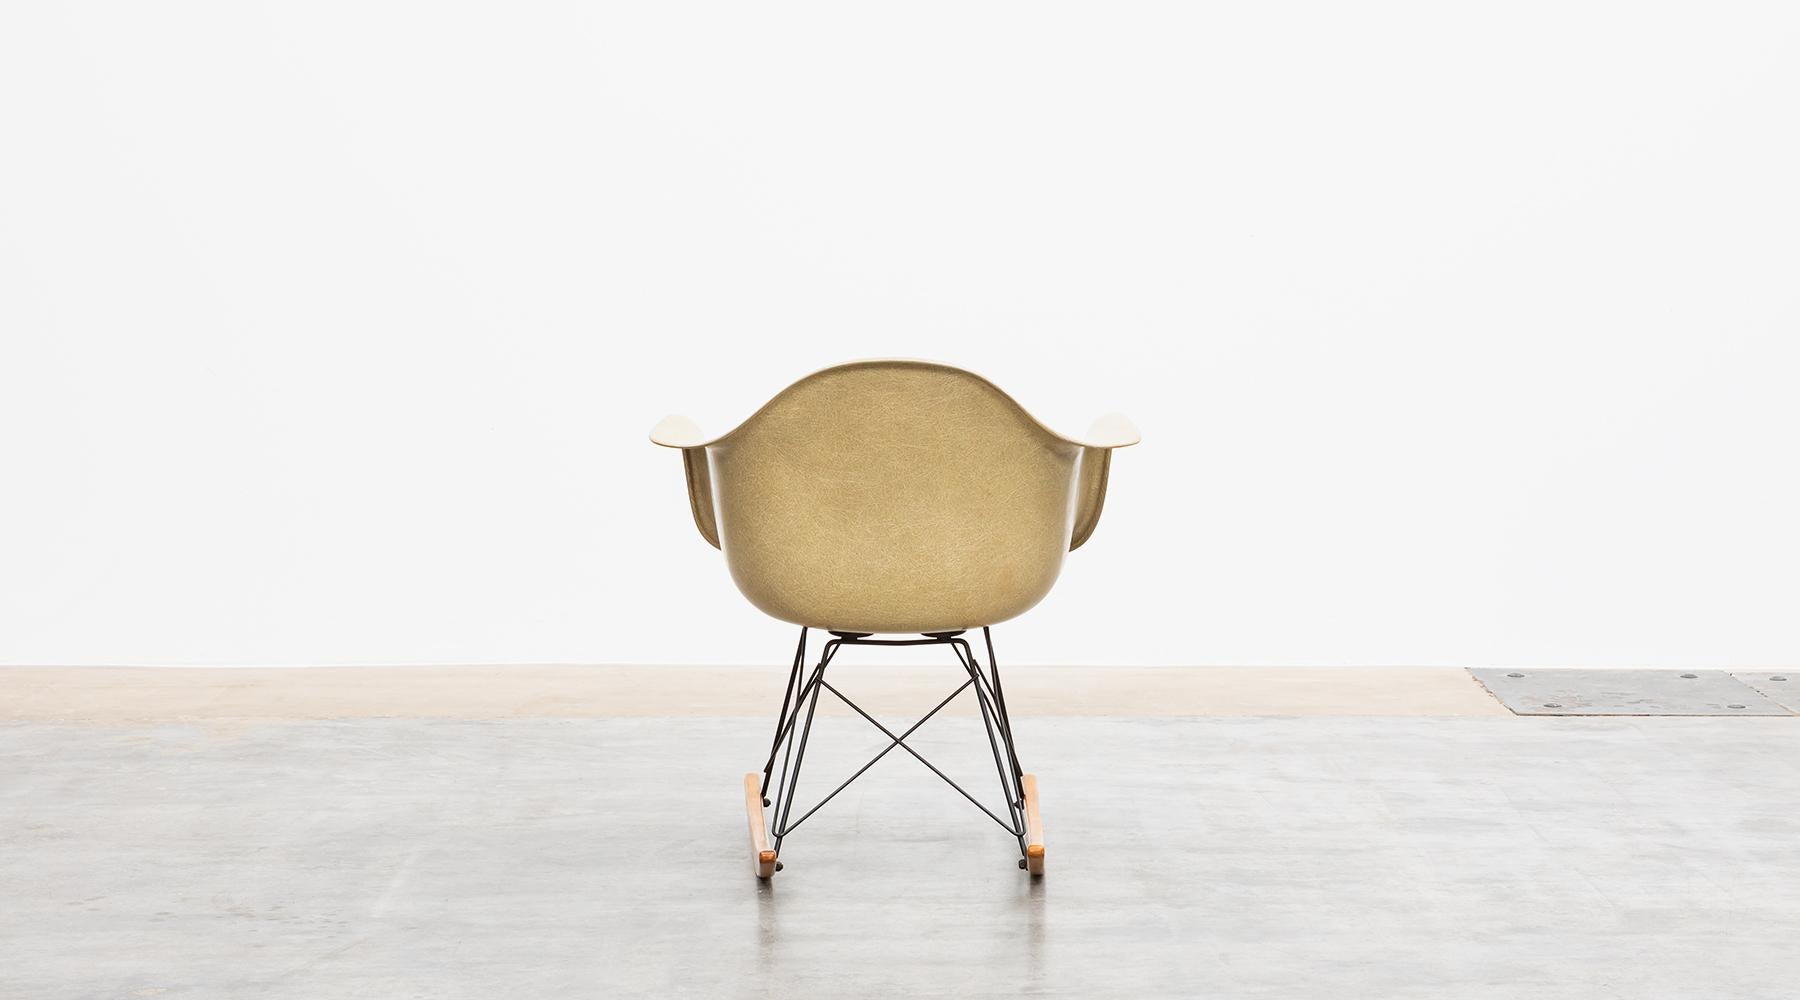 Birch 1940s Parchment Color Fiberglass Shell RAR Rocking Chair by Charles & Ray Eames For Sale